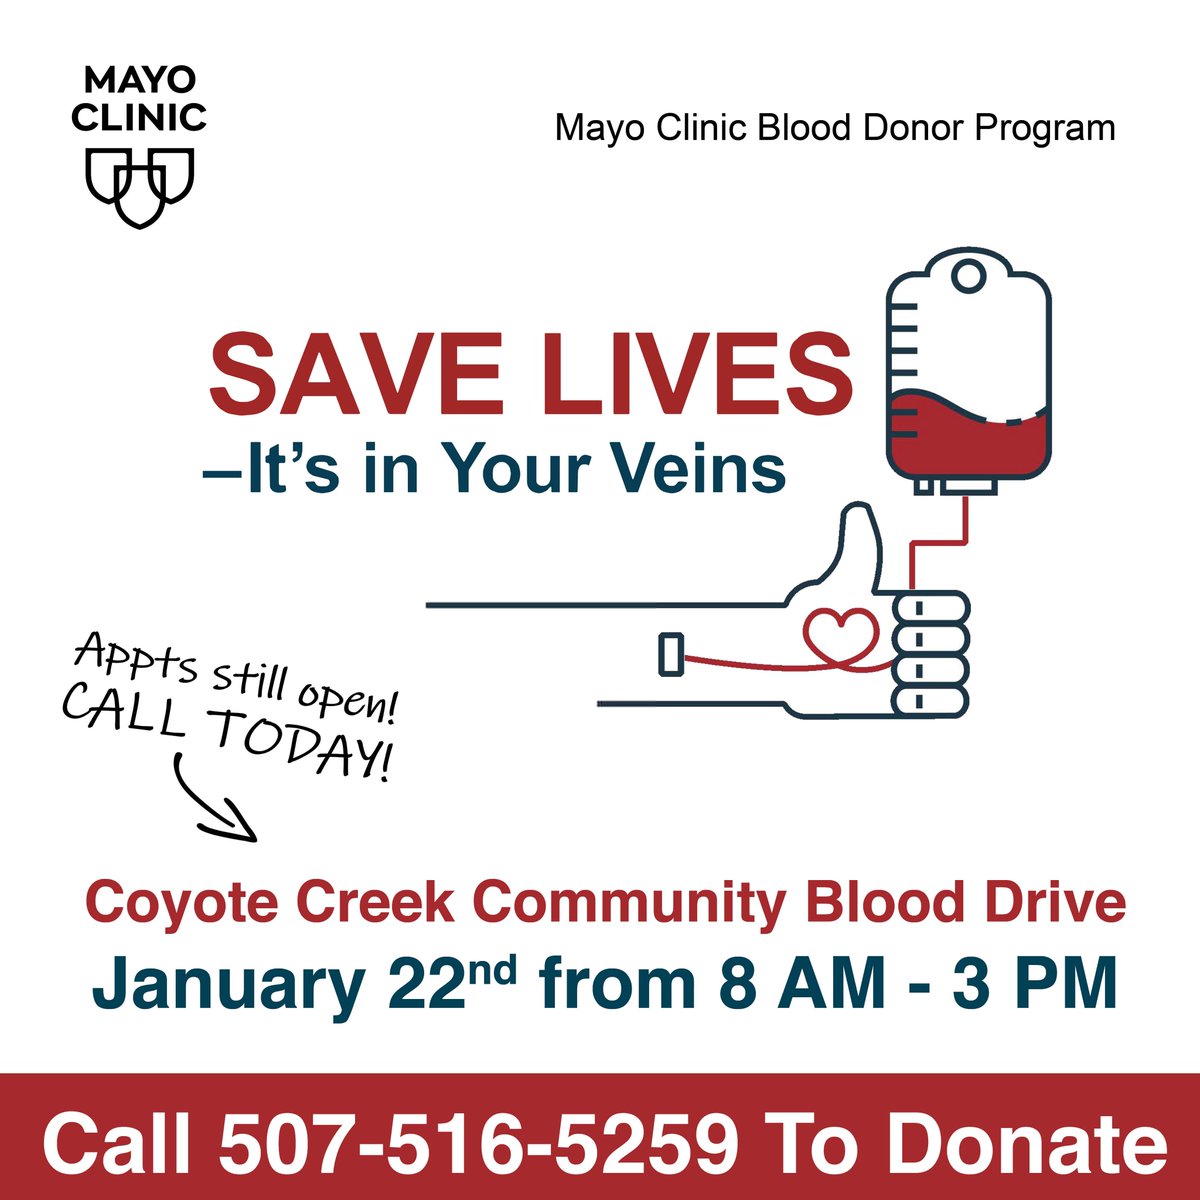 Blood Donor Program - Mayo Clinic - We need your help The Mayo Clinic  Blood Donor Center has an immediate need for O Positive blood. Will you  please pass along this urgent